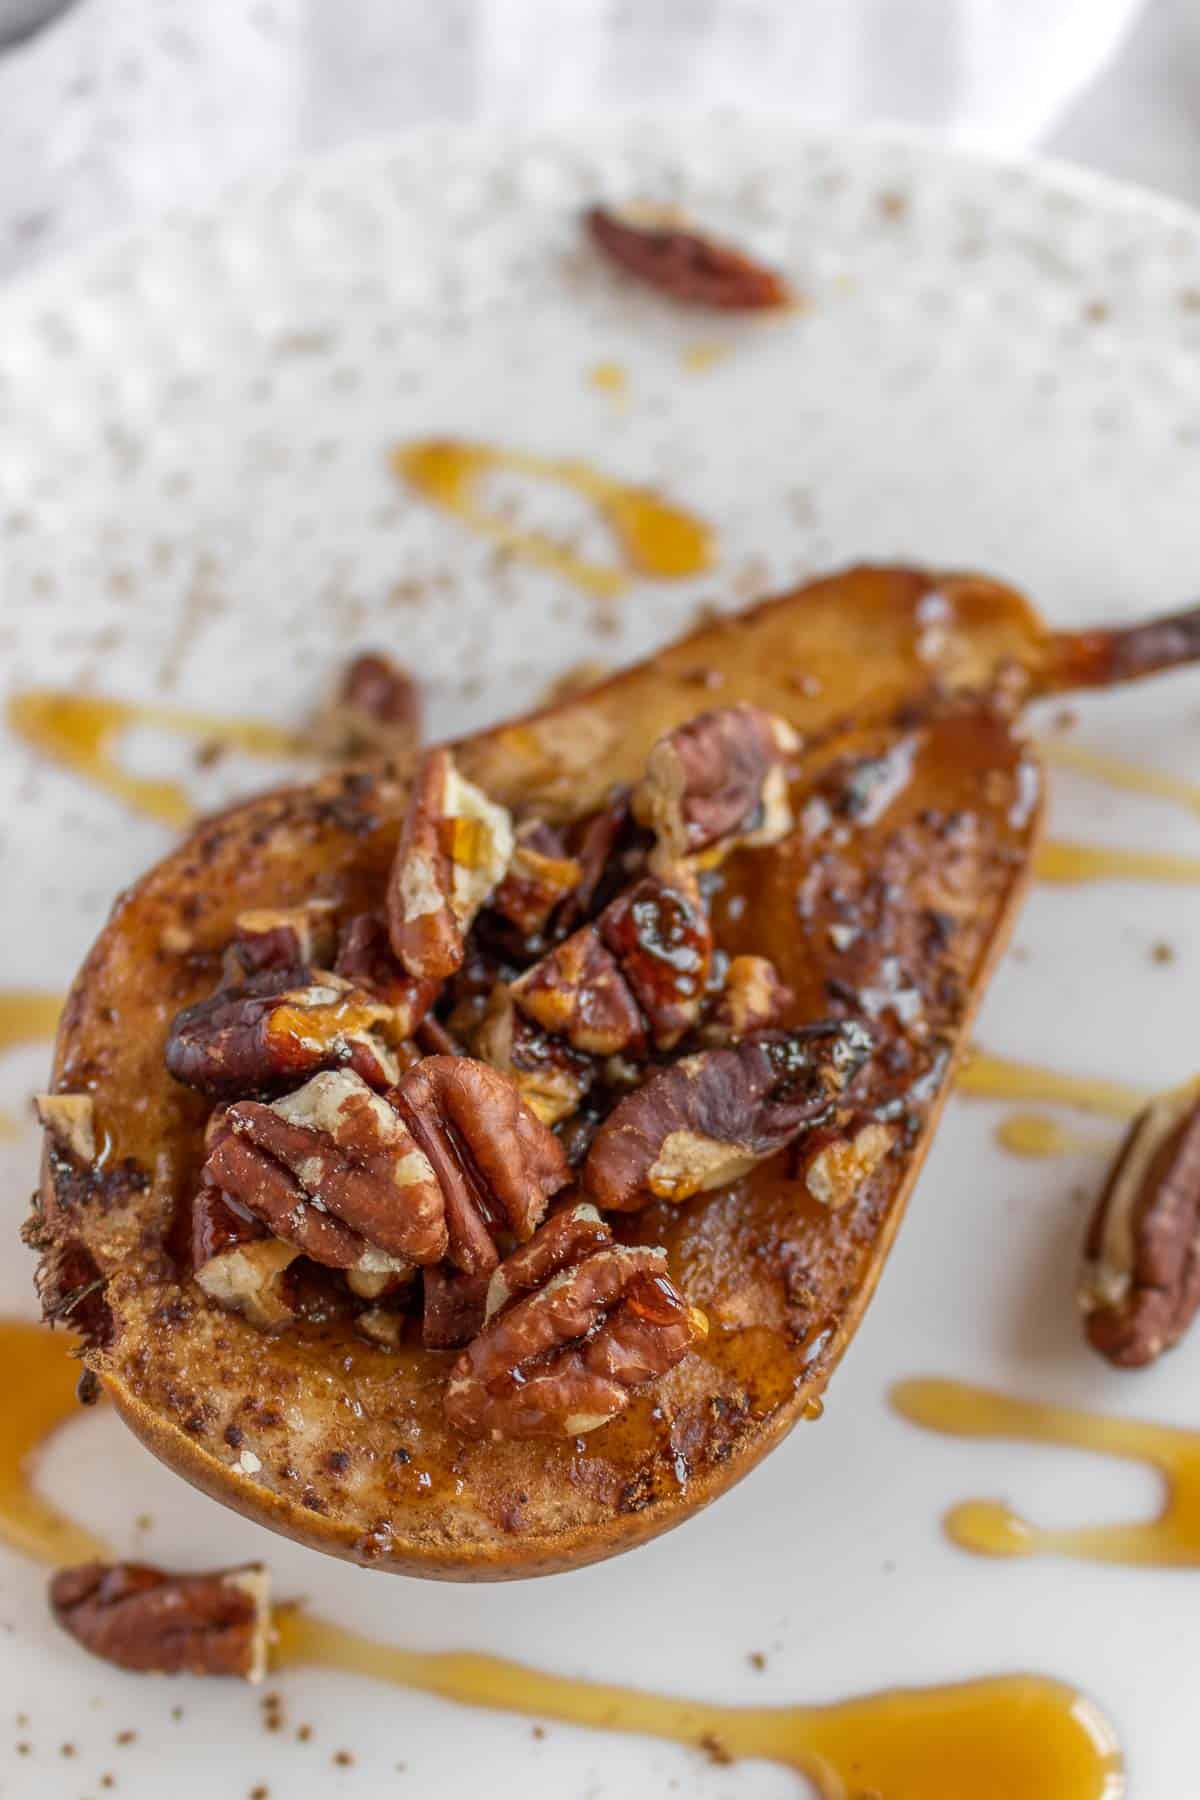 warm baked pear with cinnamon